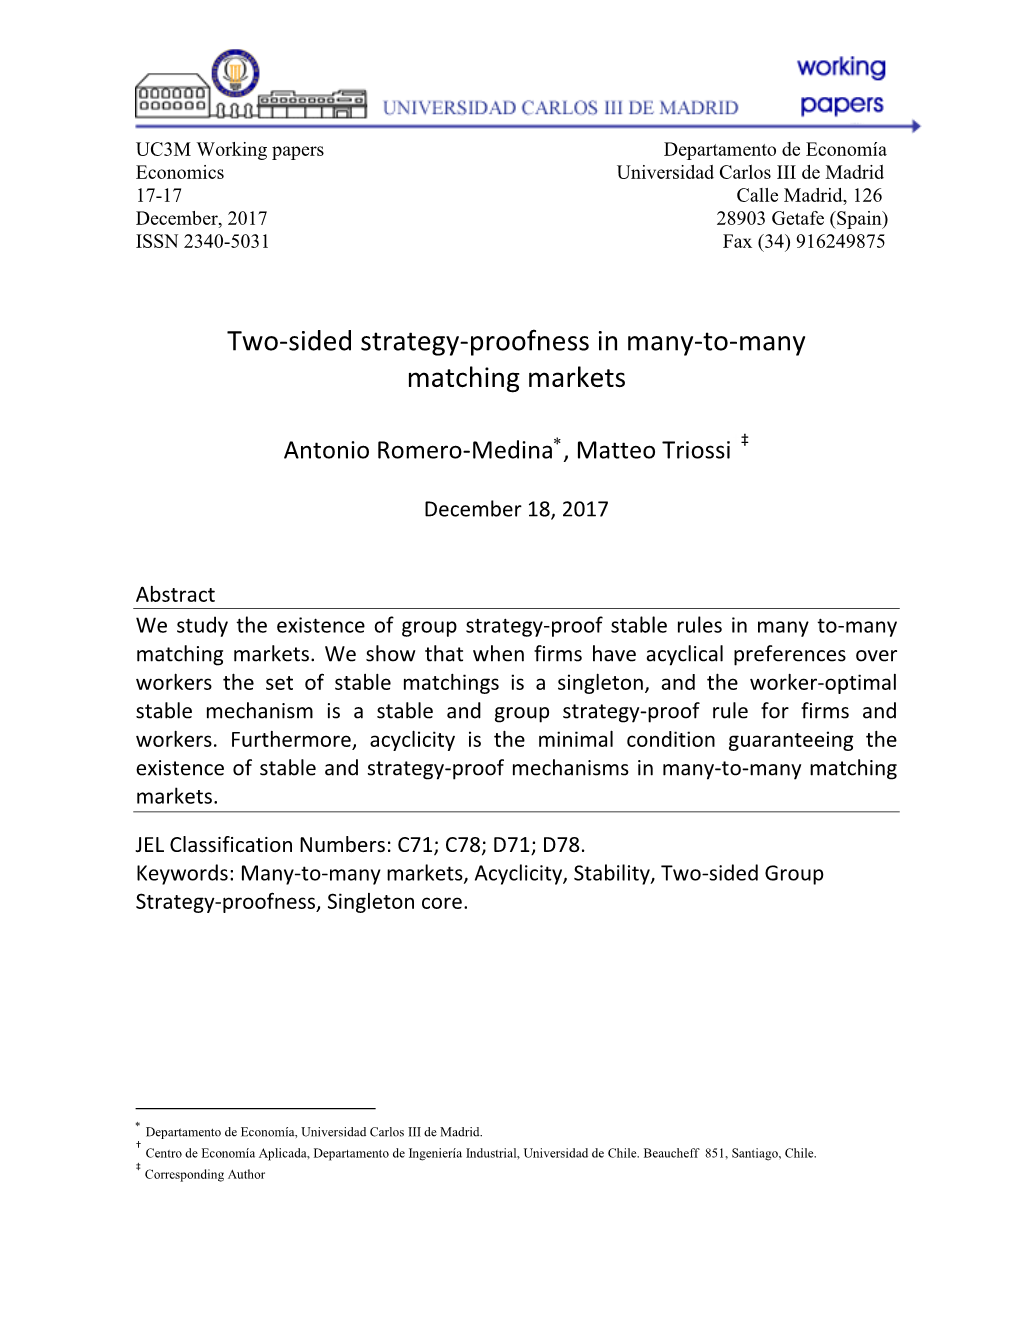 Two-Sided Strategy-Proofness in Many-To-Many Matching Markets